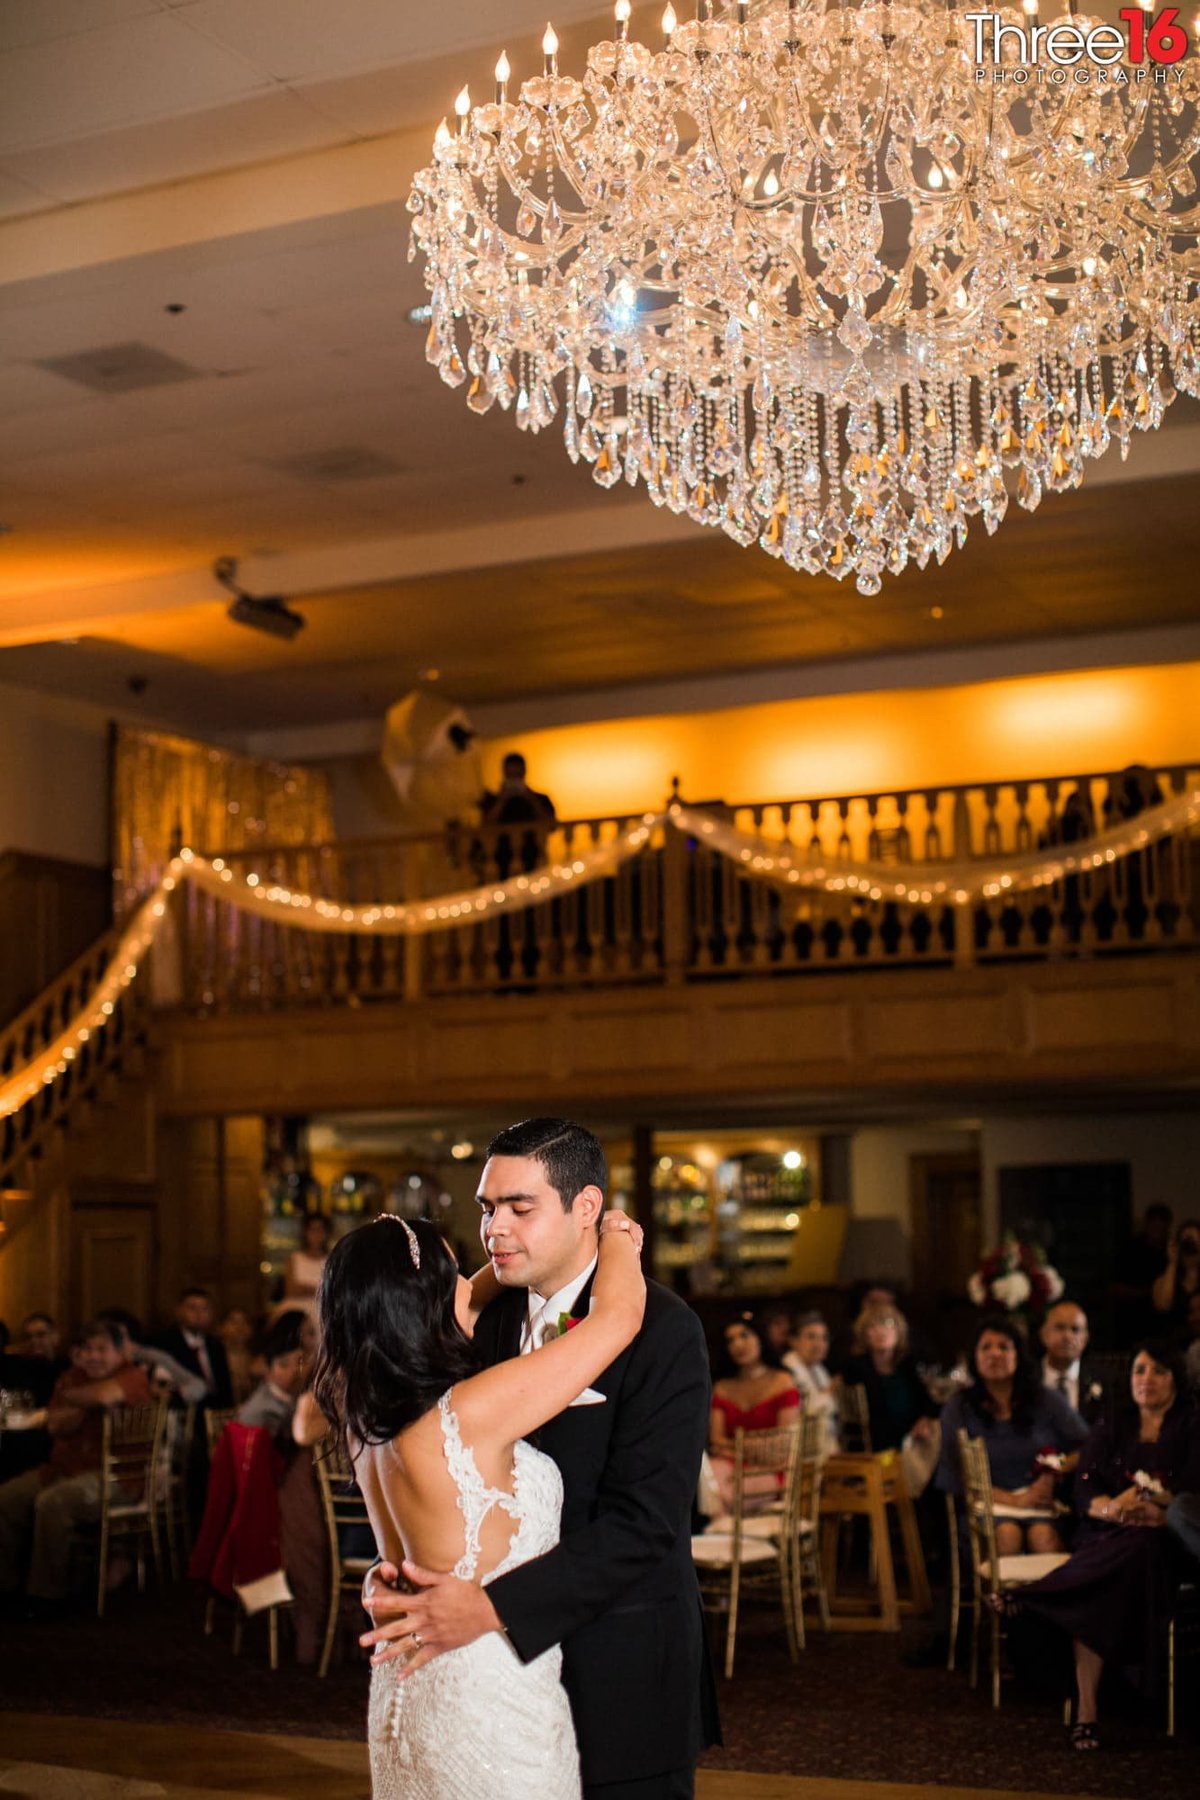 Bride and Groom share their first dance together during their wedding reception at the Swiss Park Banquet Center in Whittier, CA